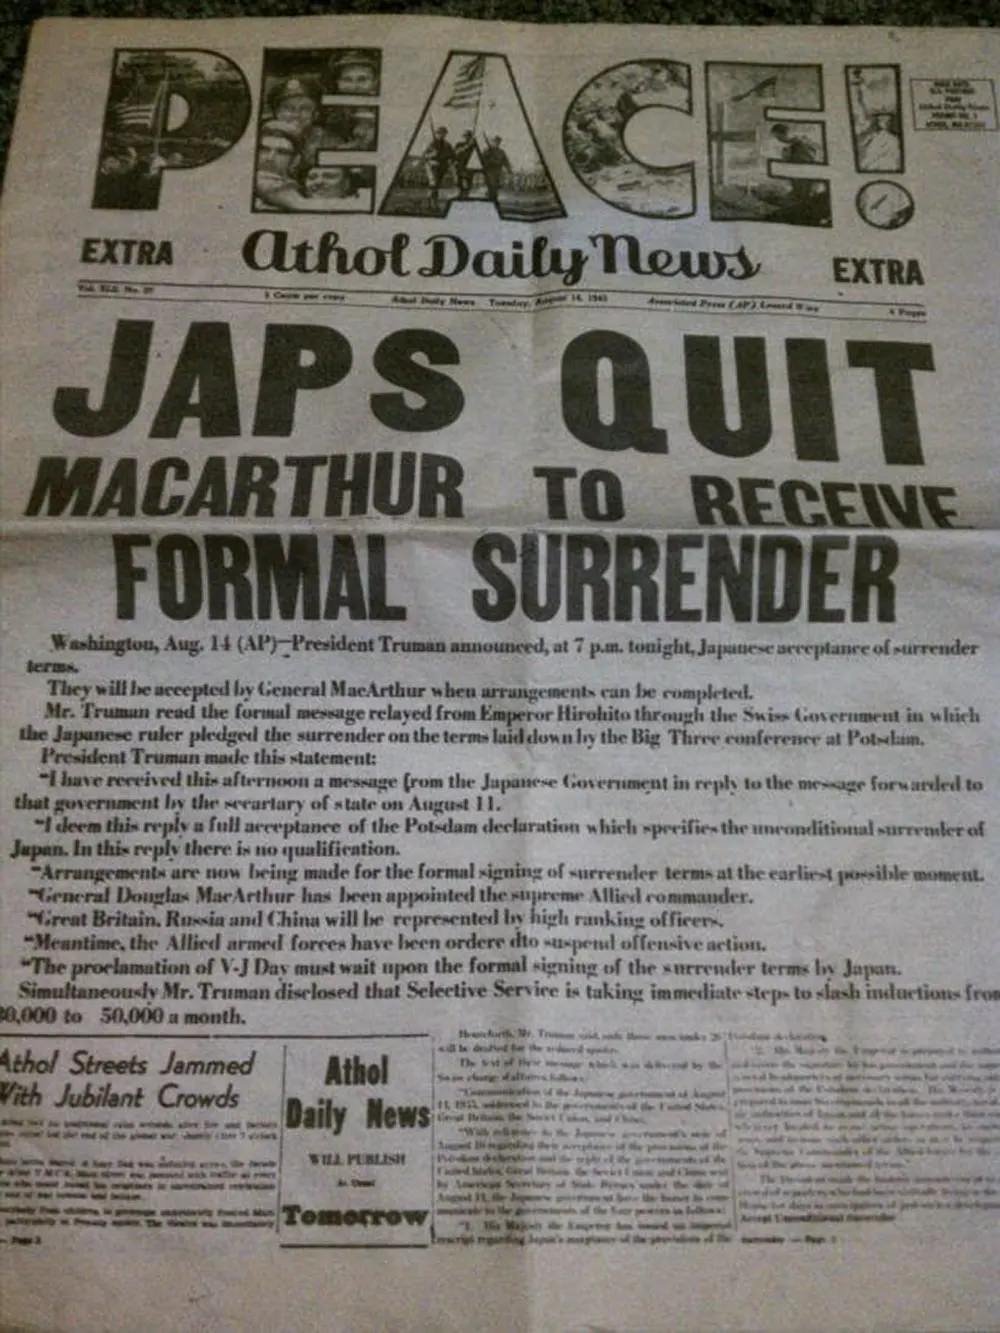 The actual surrender took place on 14 August 1945. All that was left was the formal ceremony and occupation.